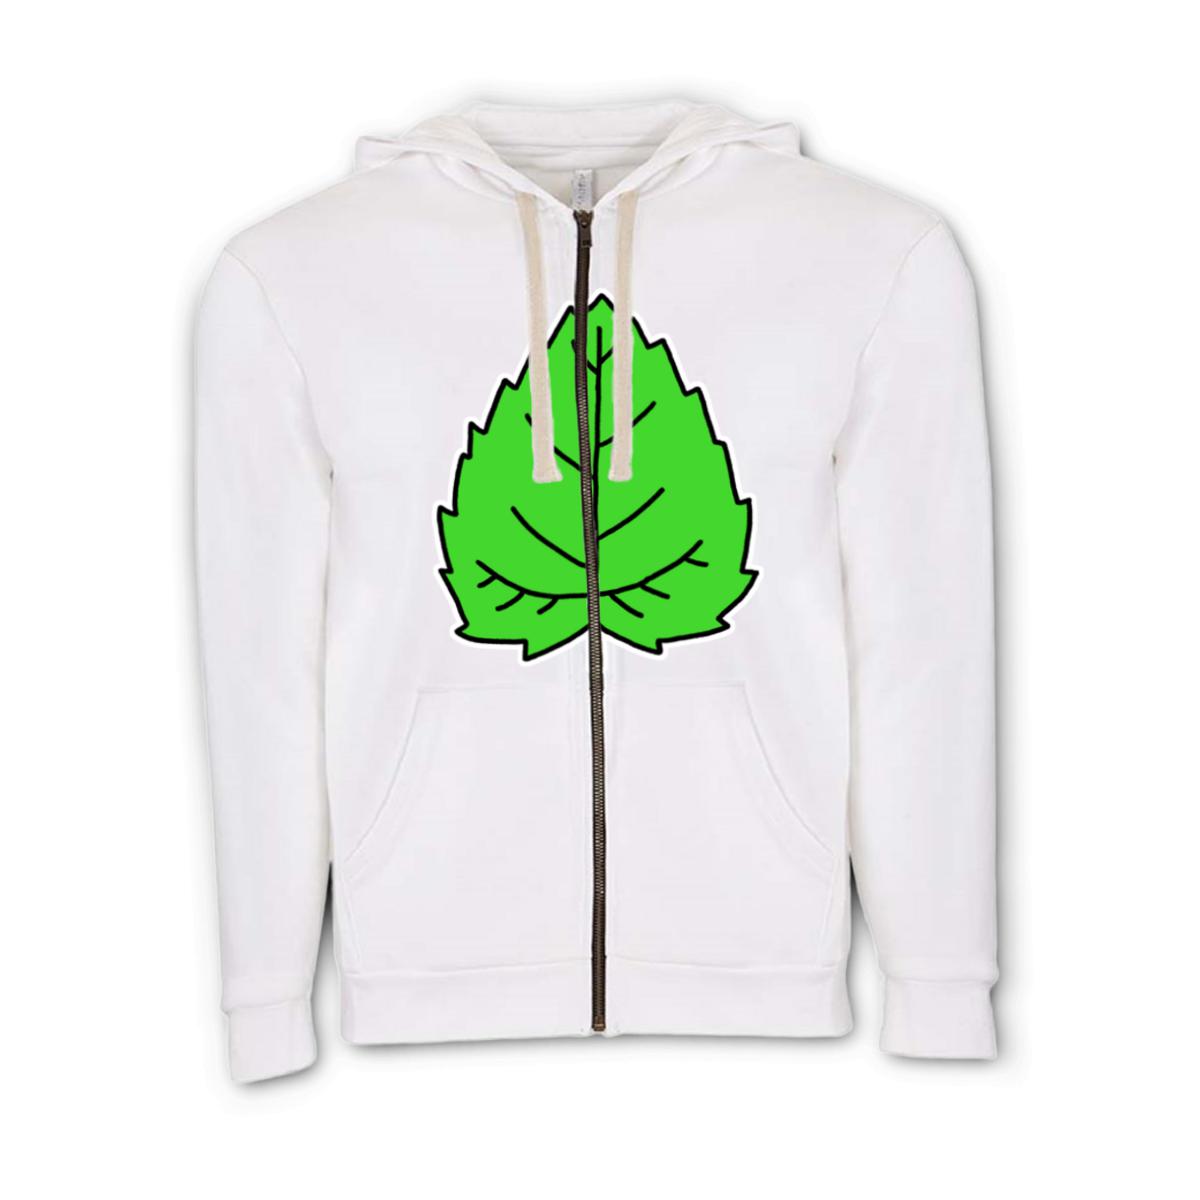 Mulberry Leaf Unisex Zip Hoodie Small white